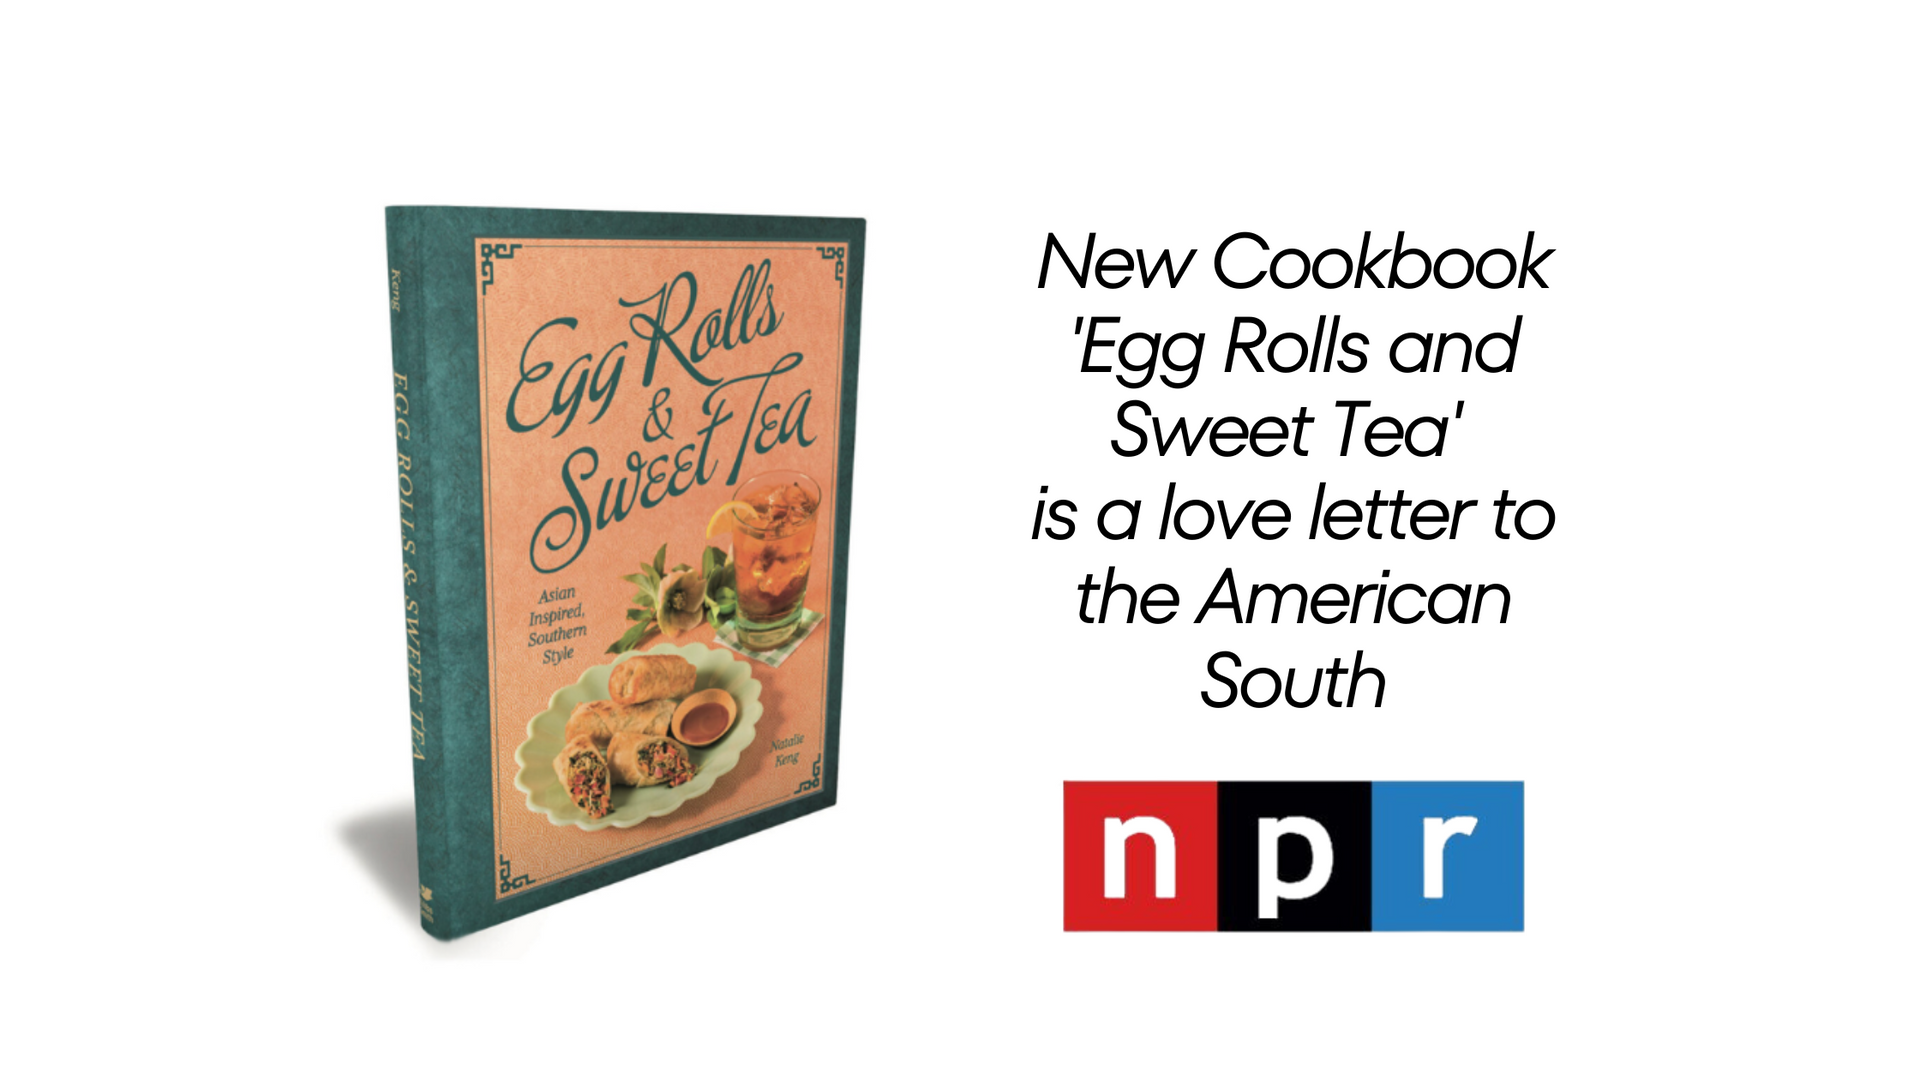 New Cookbook 'Egg Rolls and Sweet Tea'  is a love letter to the American South